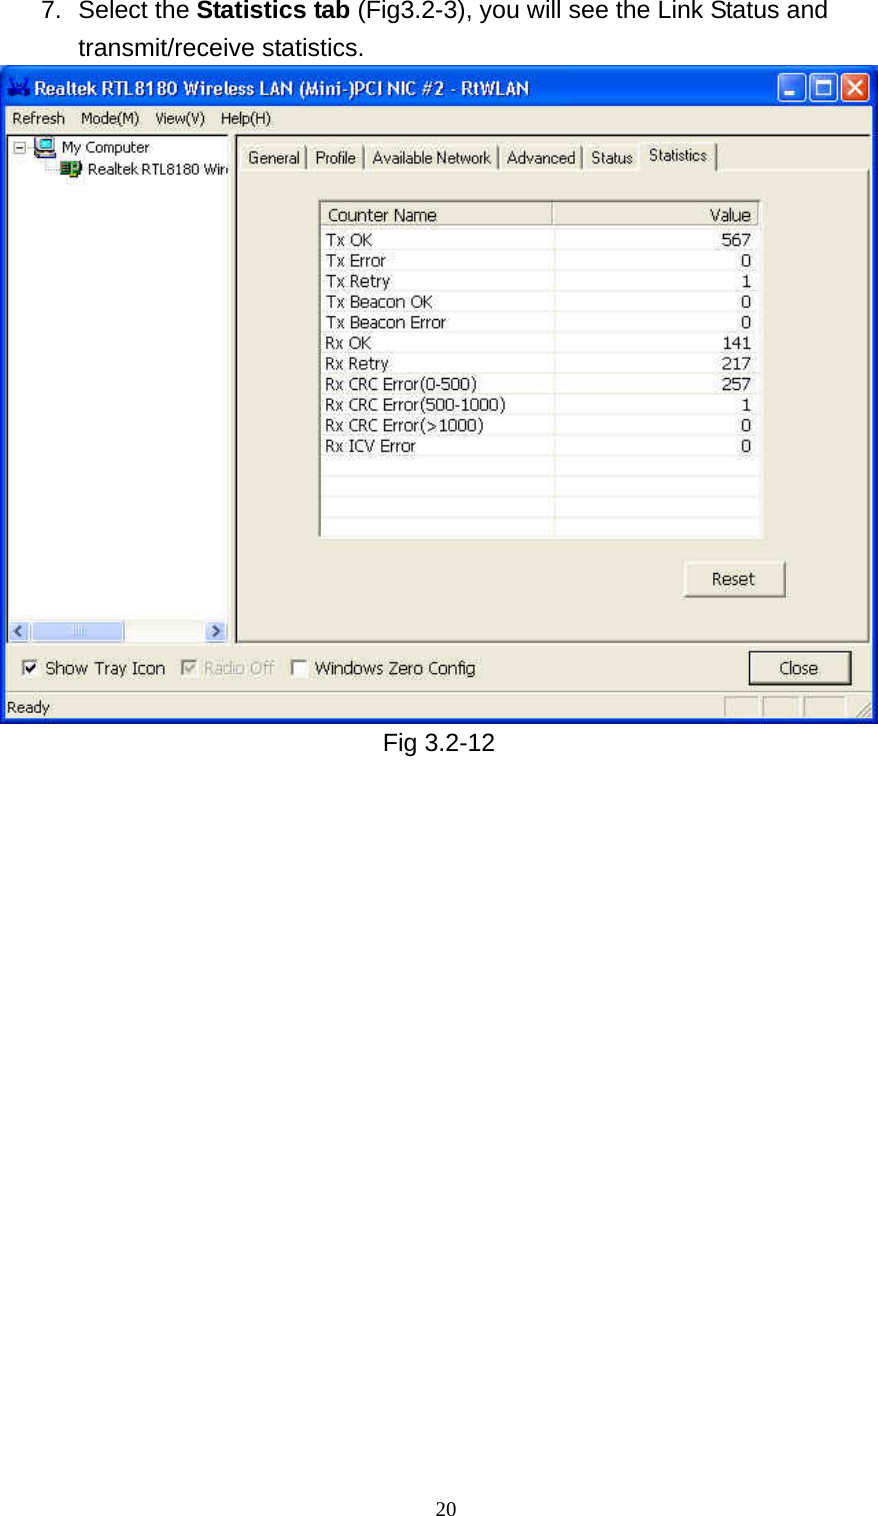   20 7. Select the Statistics tab (Fig3.2-3), you will see the Link Status and transmit/receive statistics.  Fig 3.2-12  